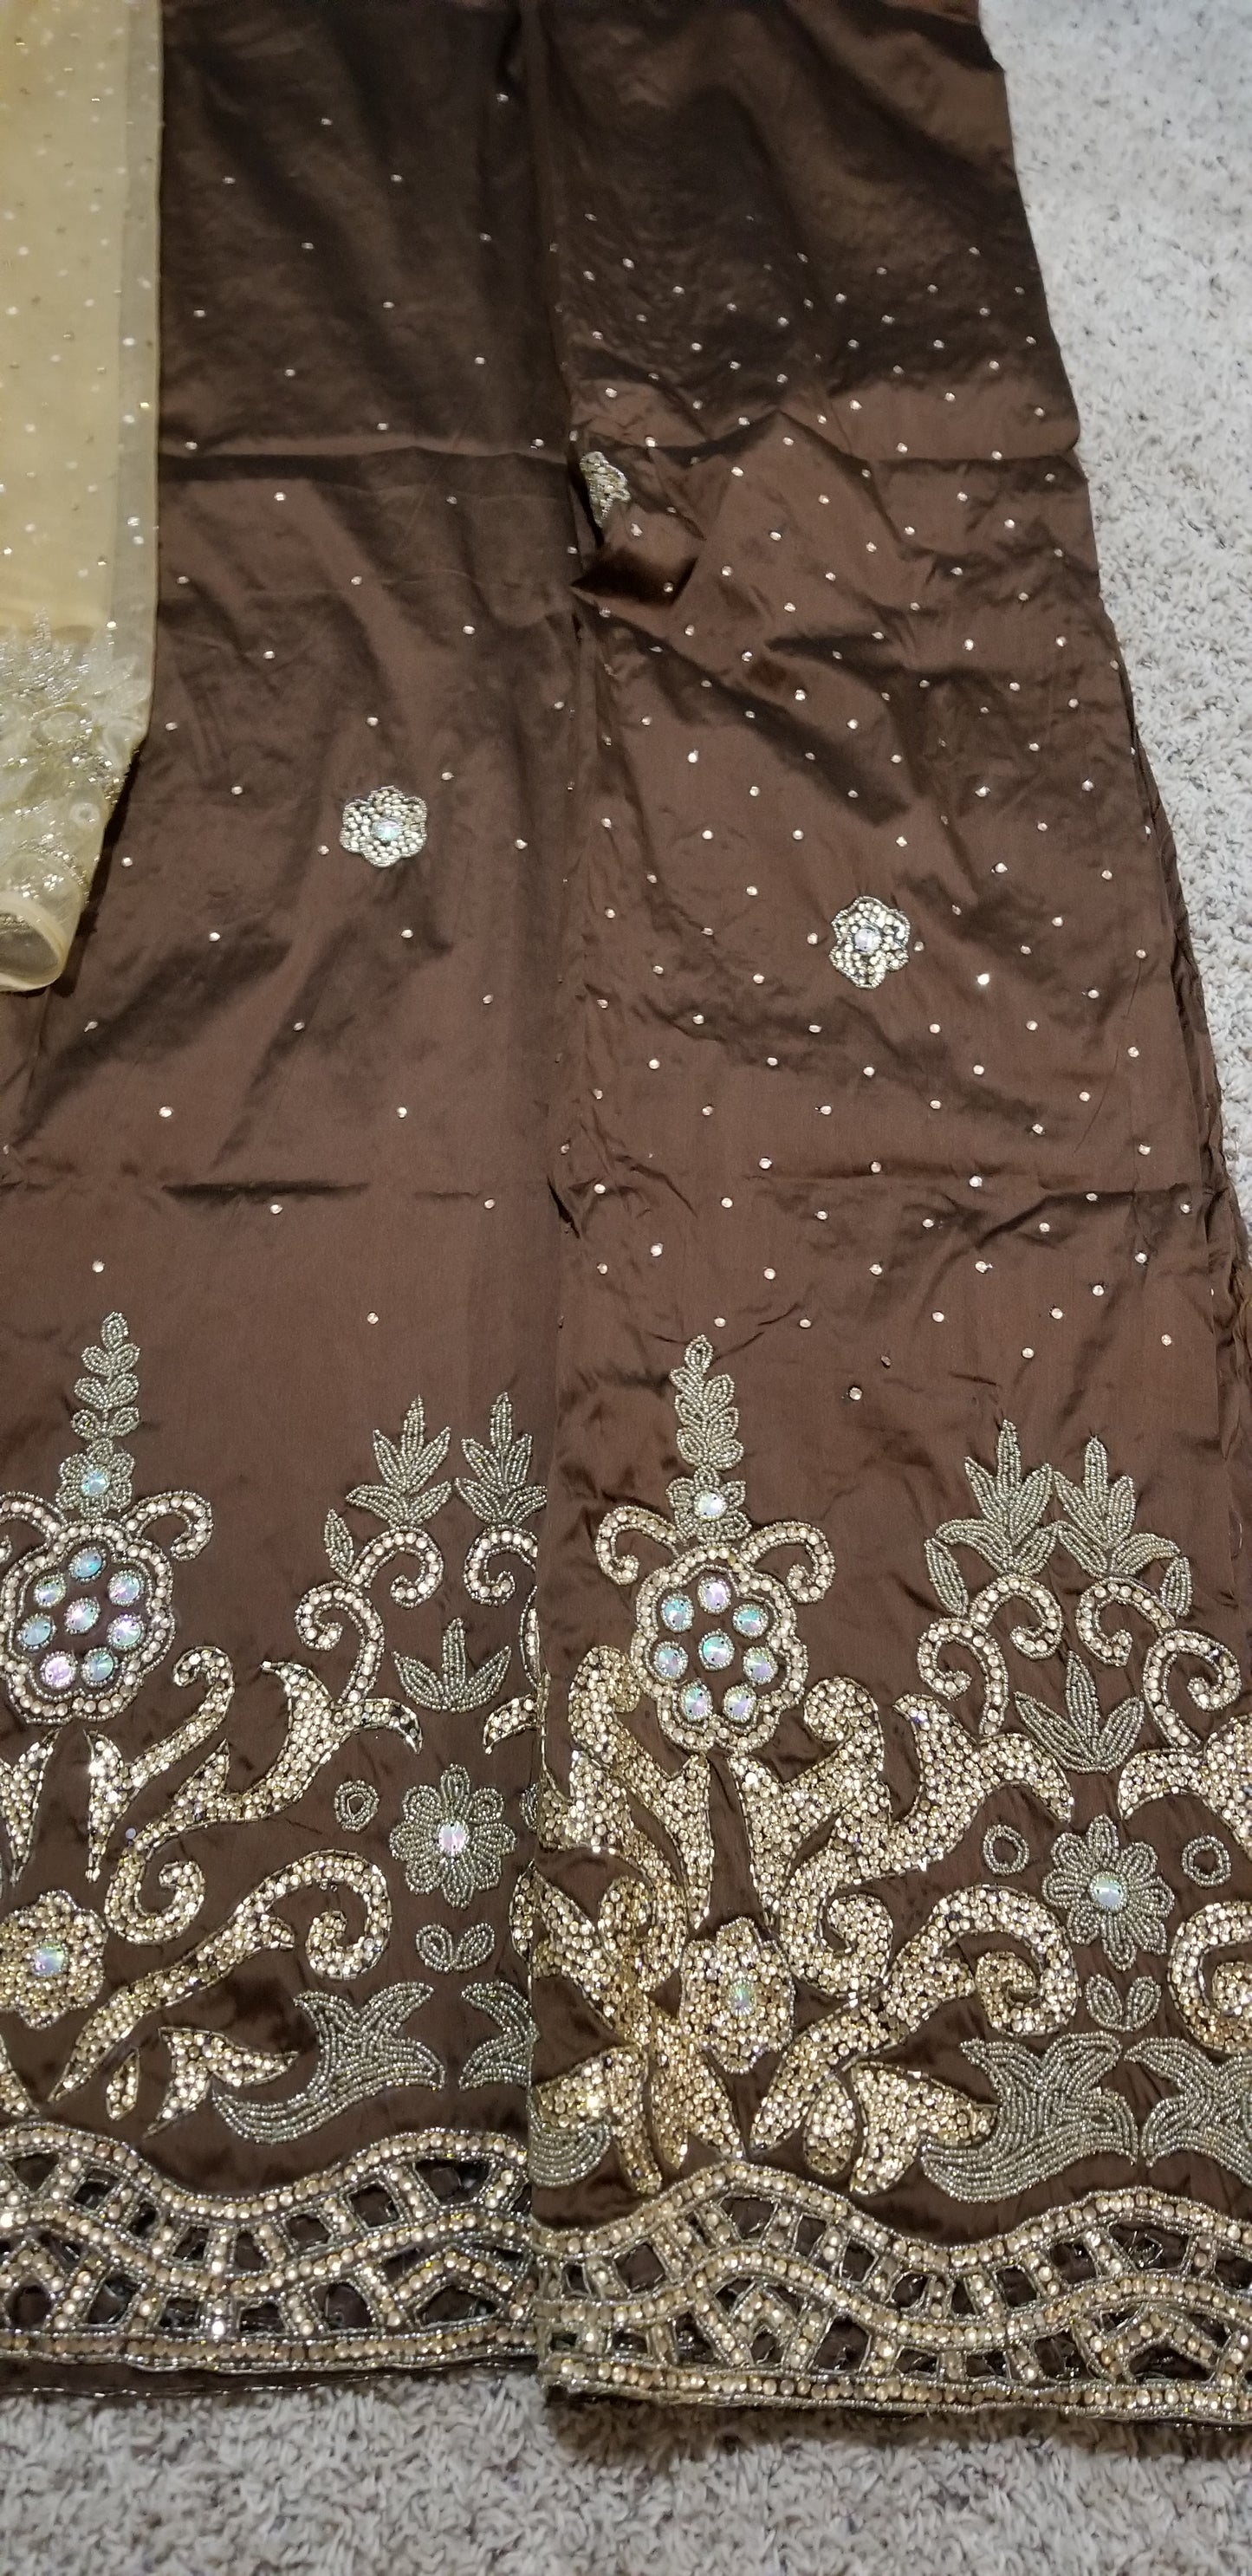 Sale: New arrival chocolate VIP George wrapper. Nigerian/Igbo/delta women Wrapper in silk George, all hand crystal stones. Chocolate/chocolate 5yds+ 1.8yds matching net blouse